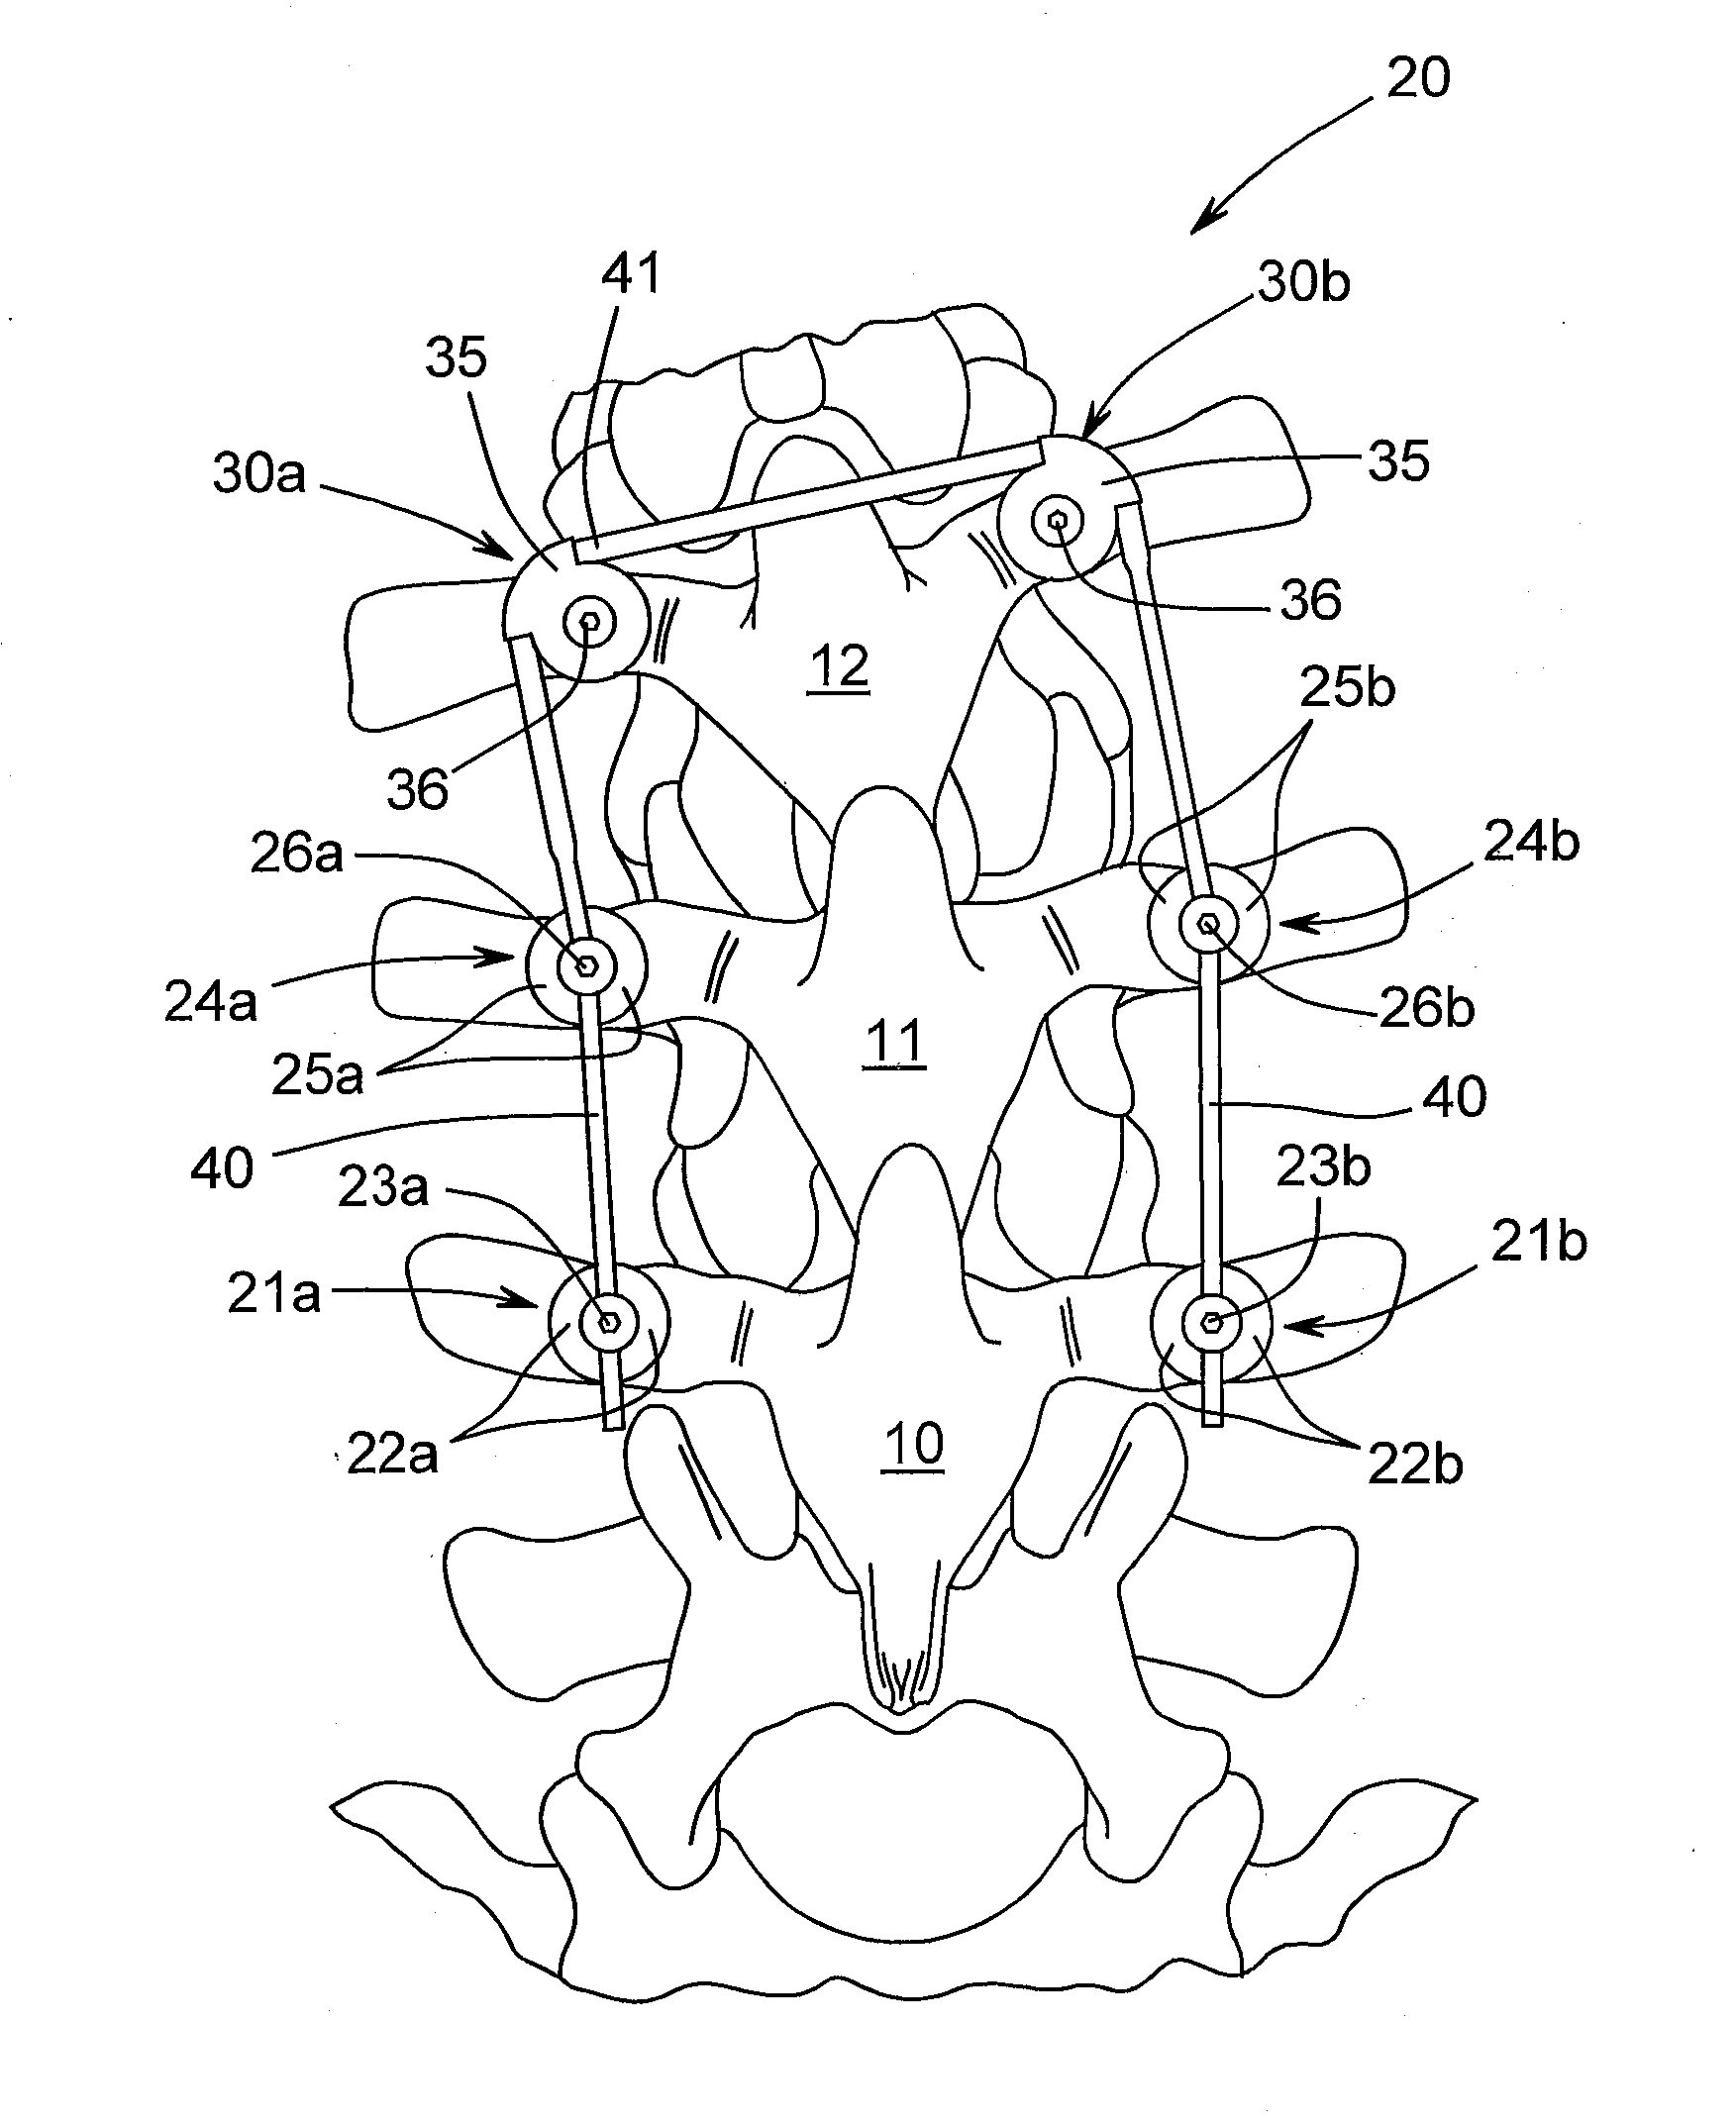 Unidirectional rotatory pedicle screw and spinal deformity correction device for correction of spinal deformity in growing children